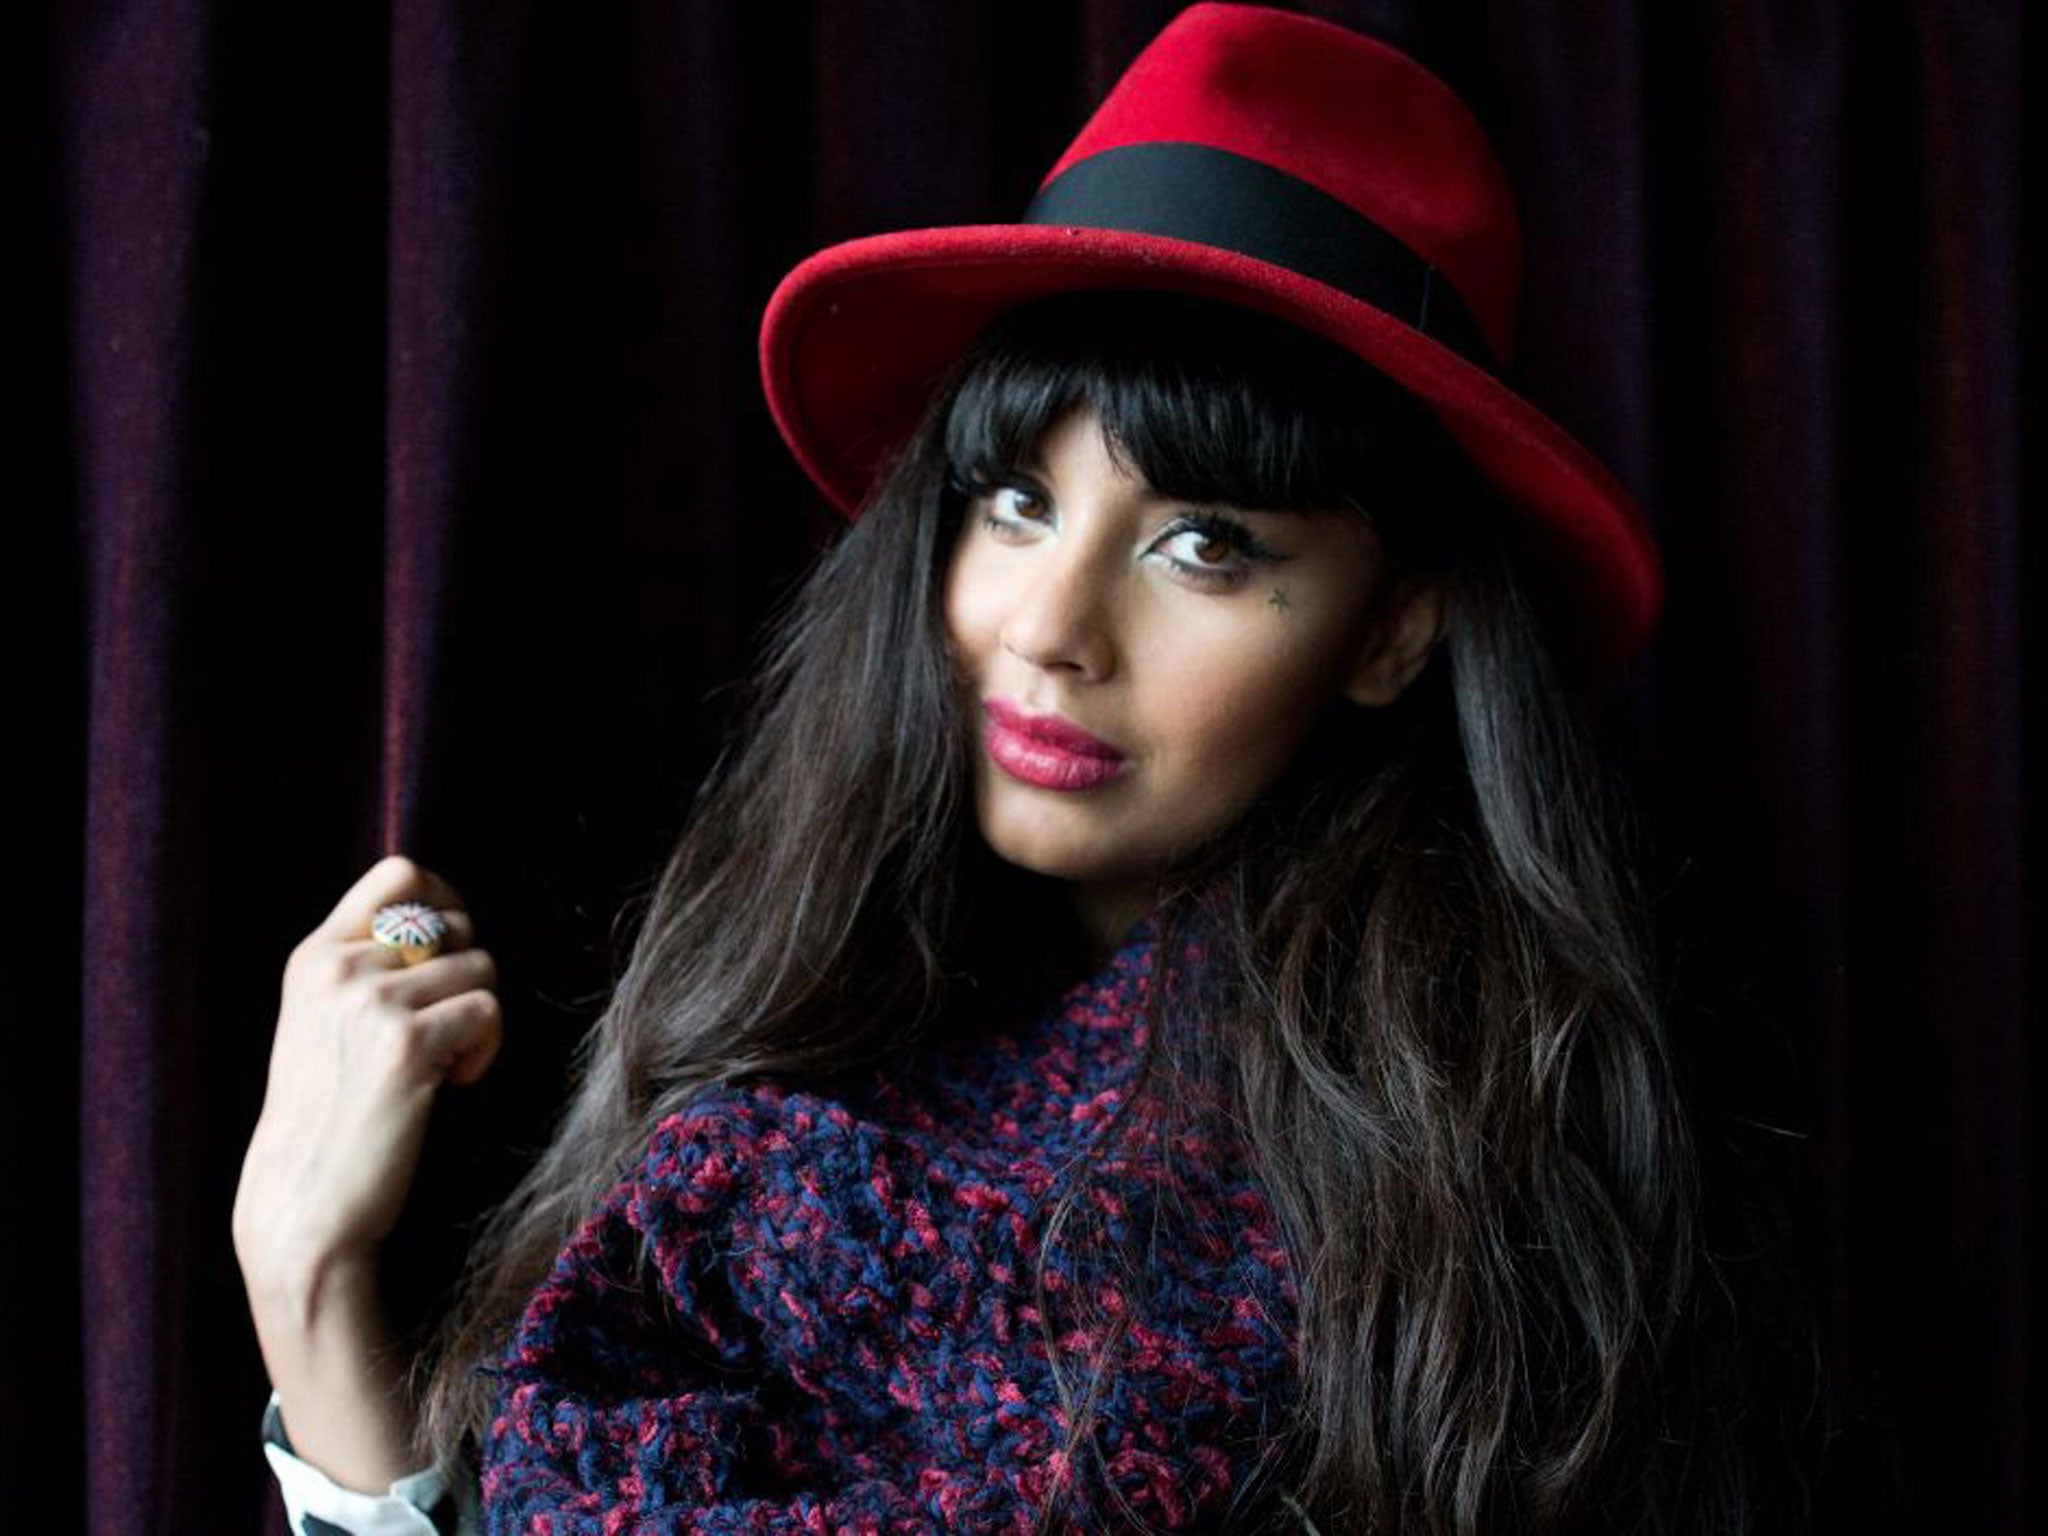 Jameela Jamil came to prominence presenting on Channel 4’s youth strand, T4